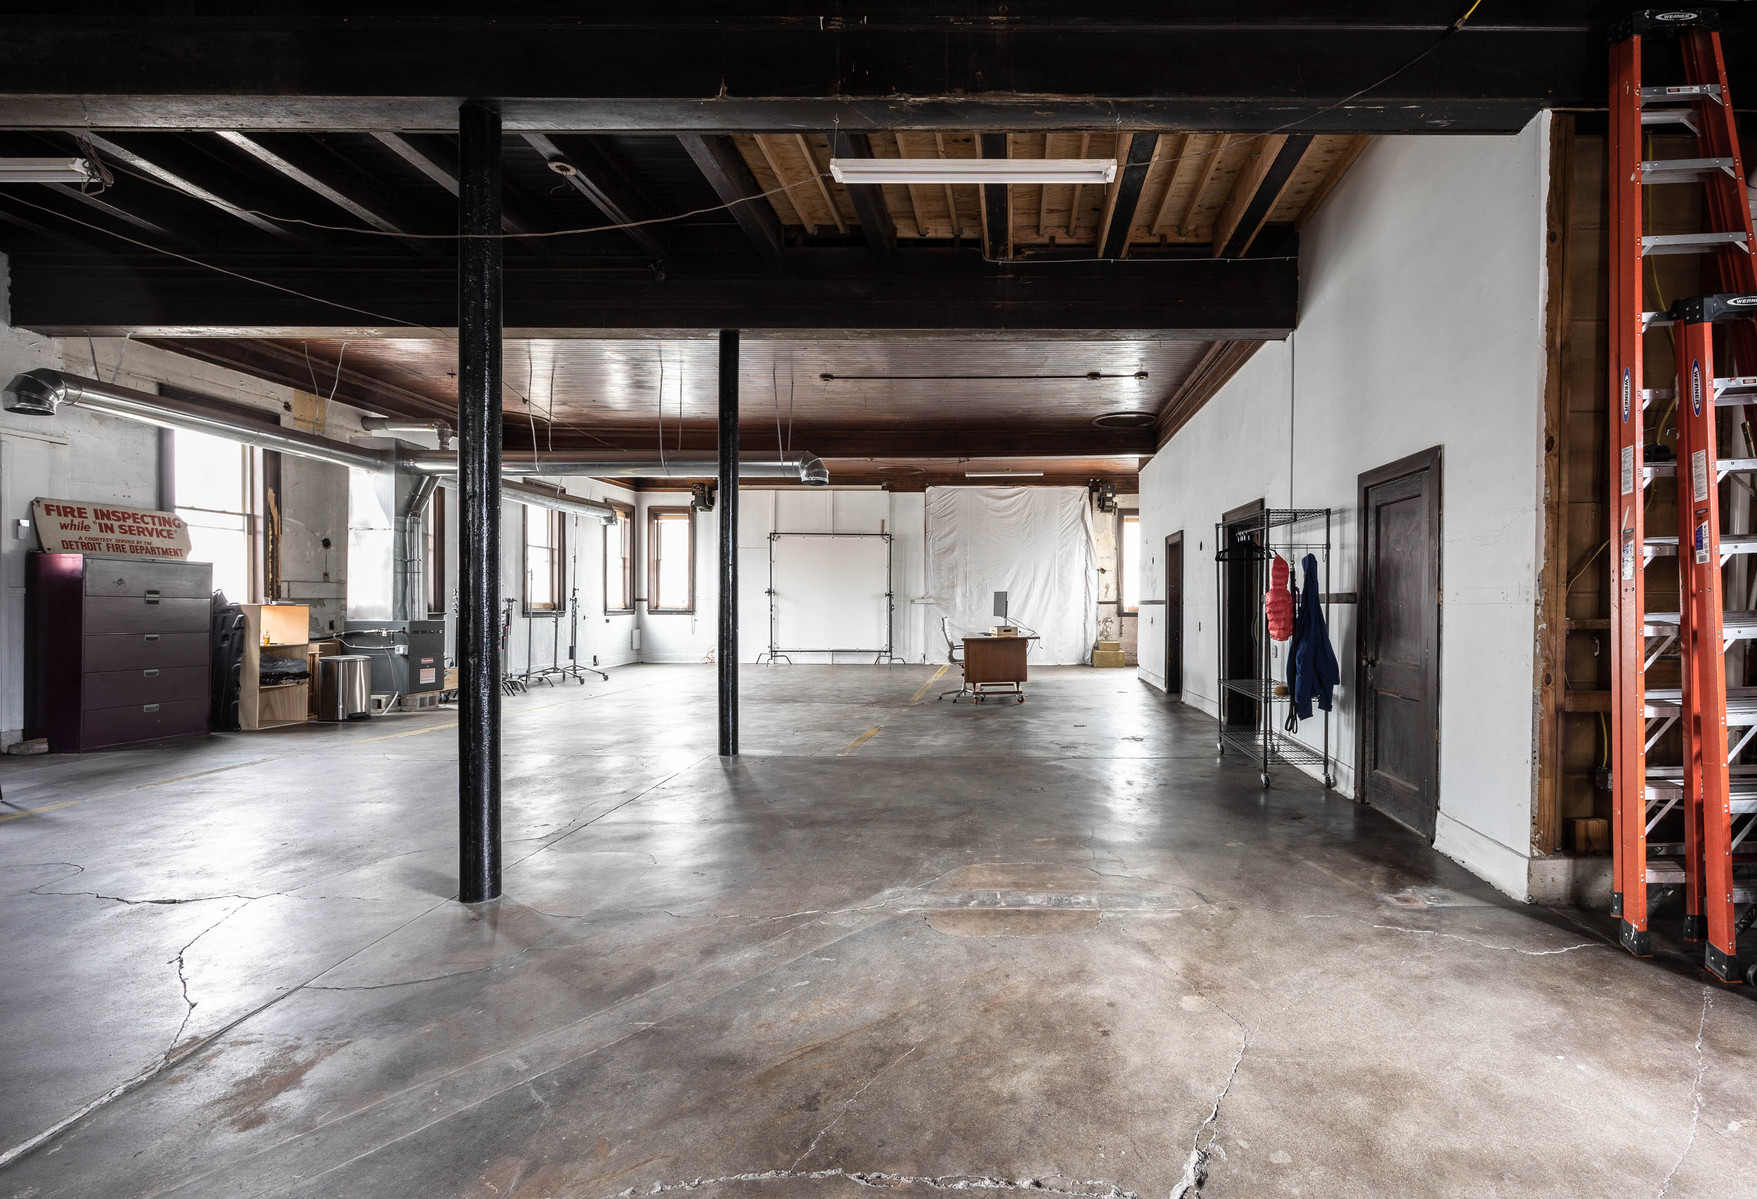 Overview of photo studio space available for daily rental with gear, lighting, grip, tethering station.